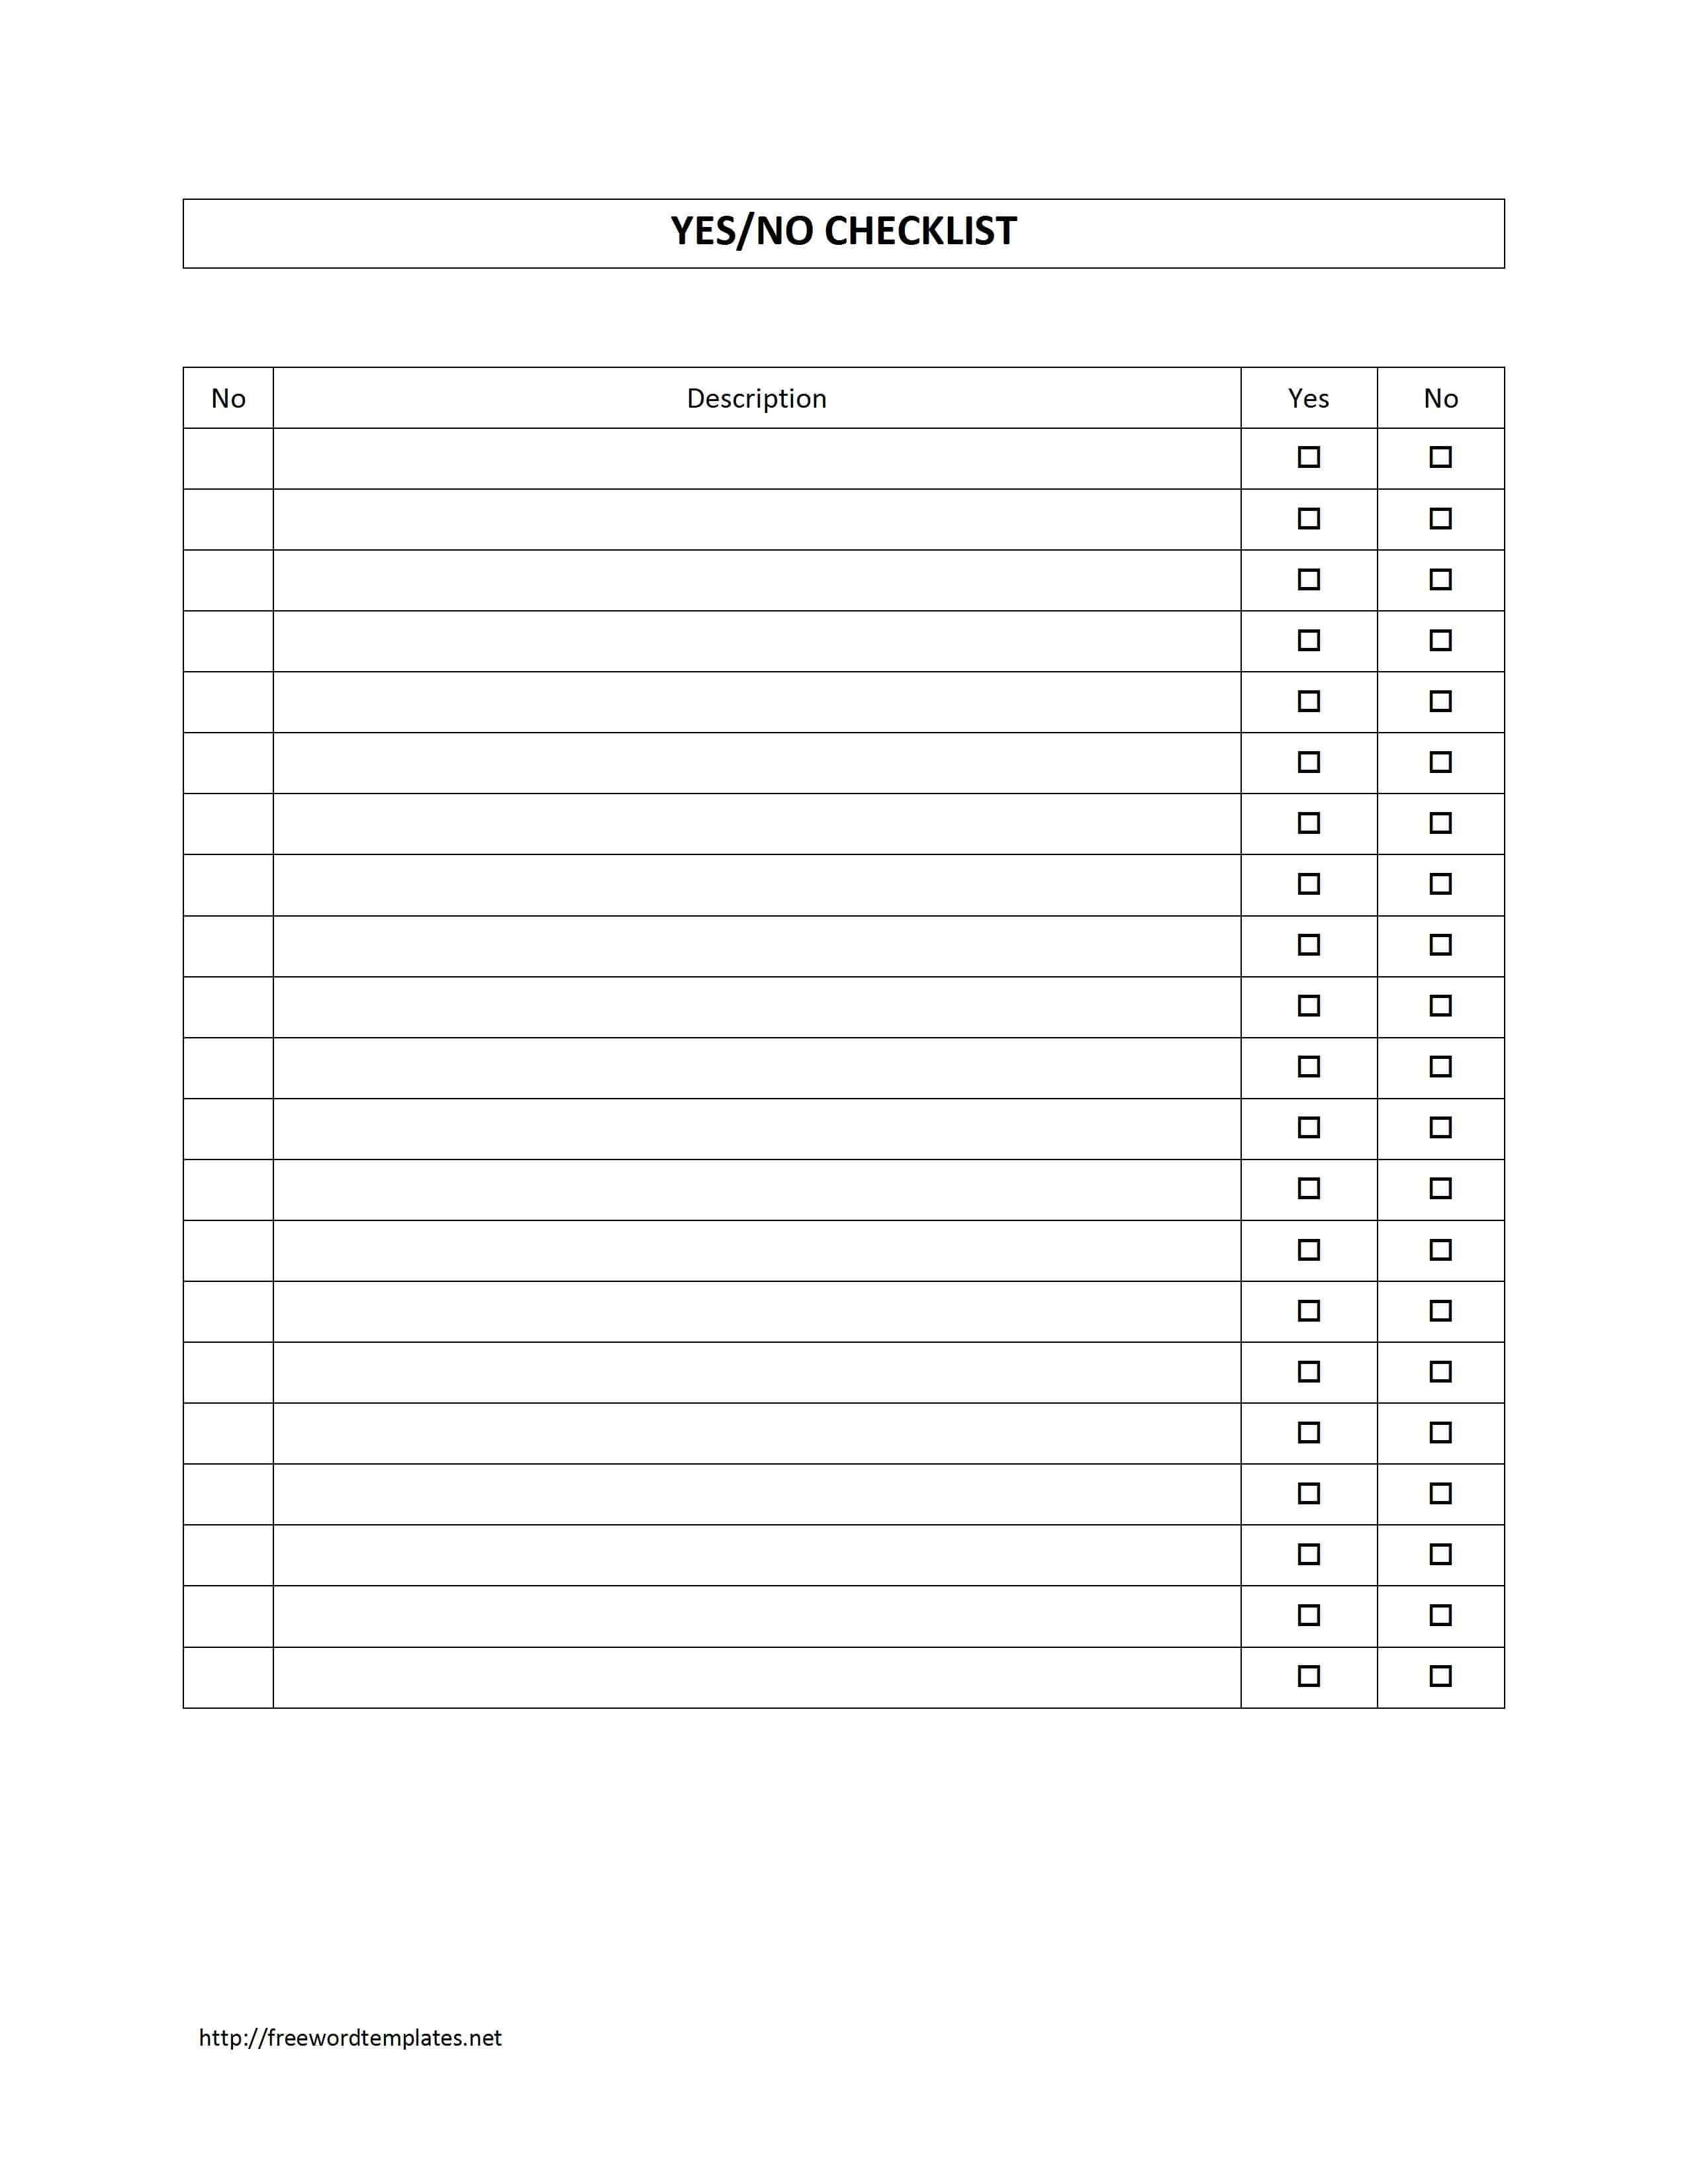 Survey Sheet With Yes/no Checklist Template | Free Microsoft Within Questionnaire Design Template Word